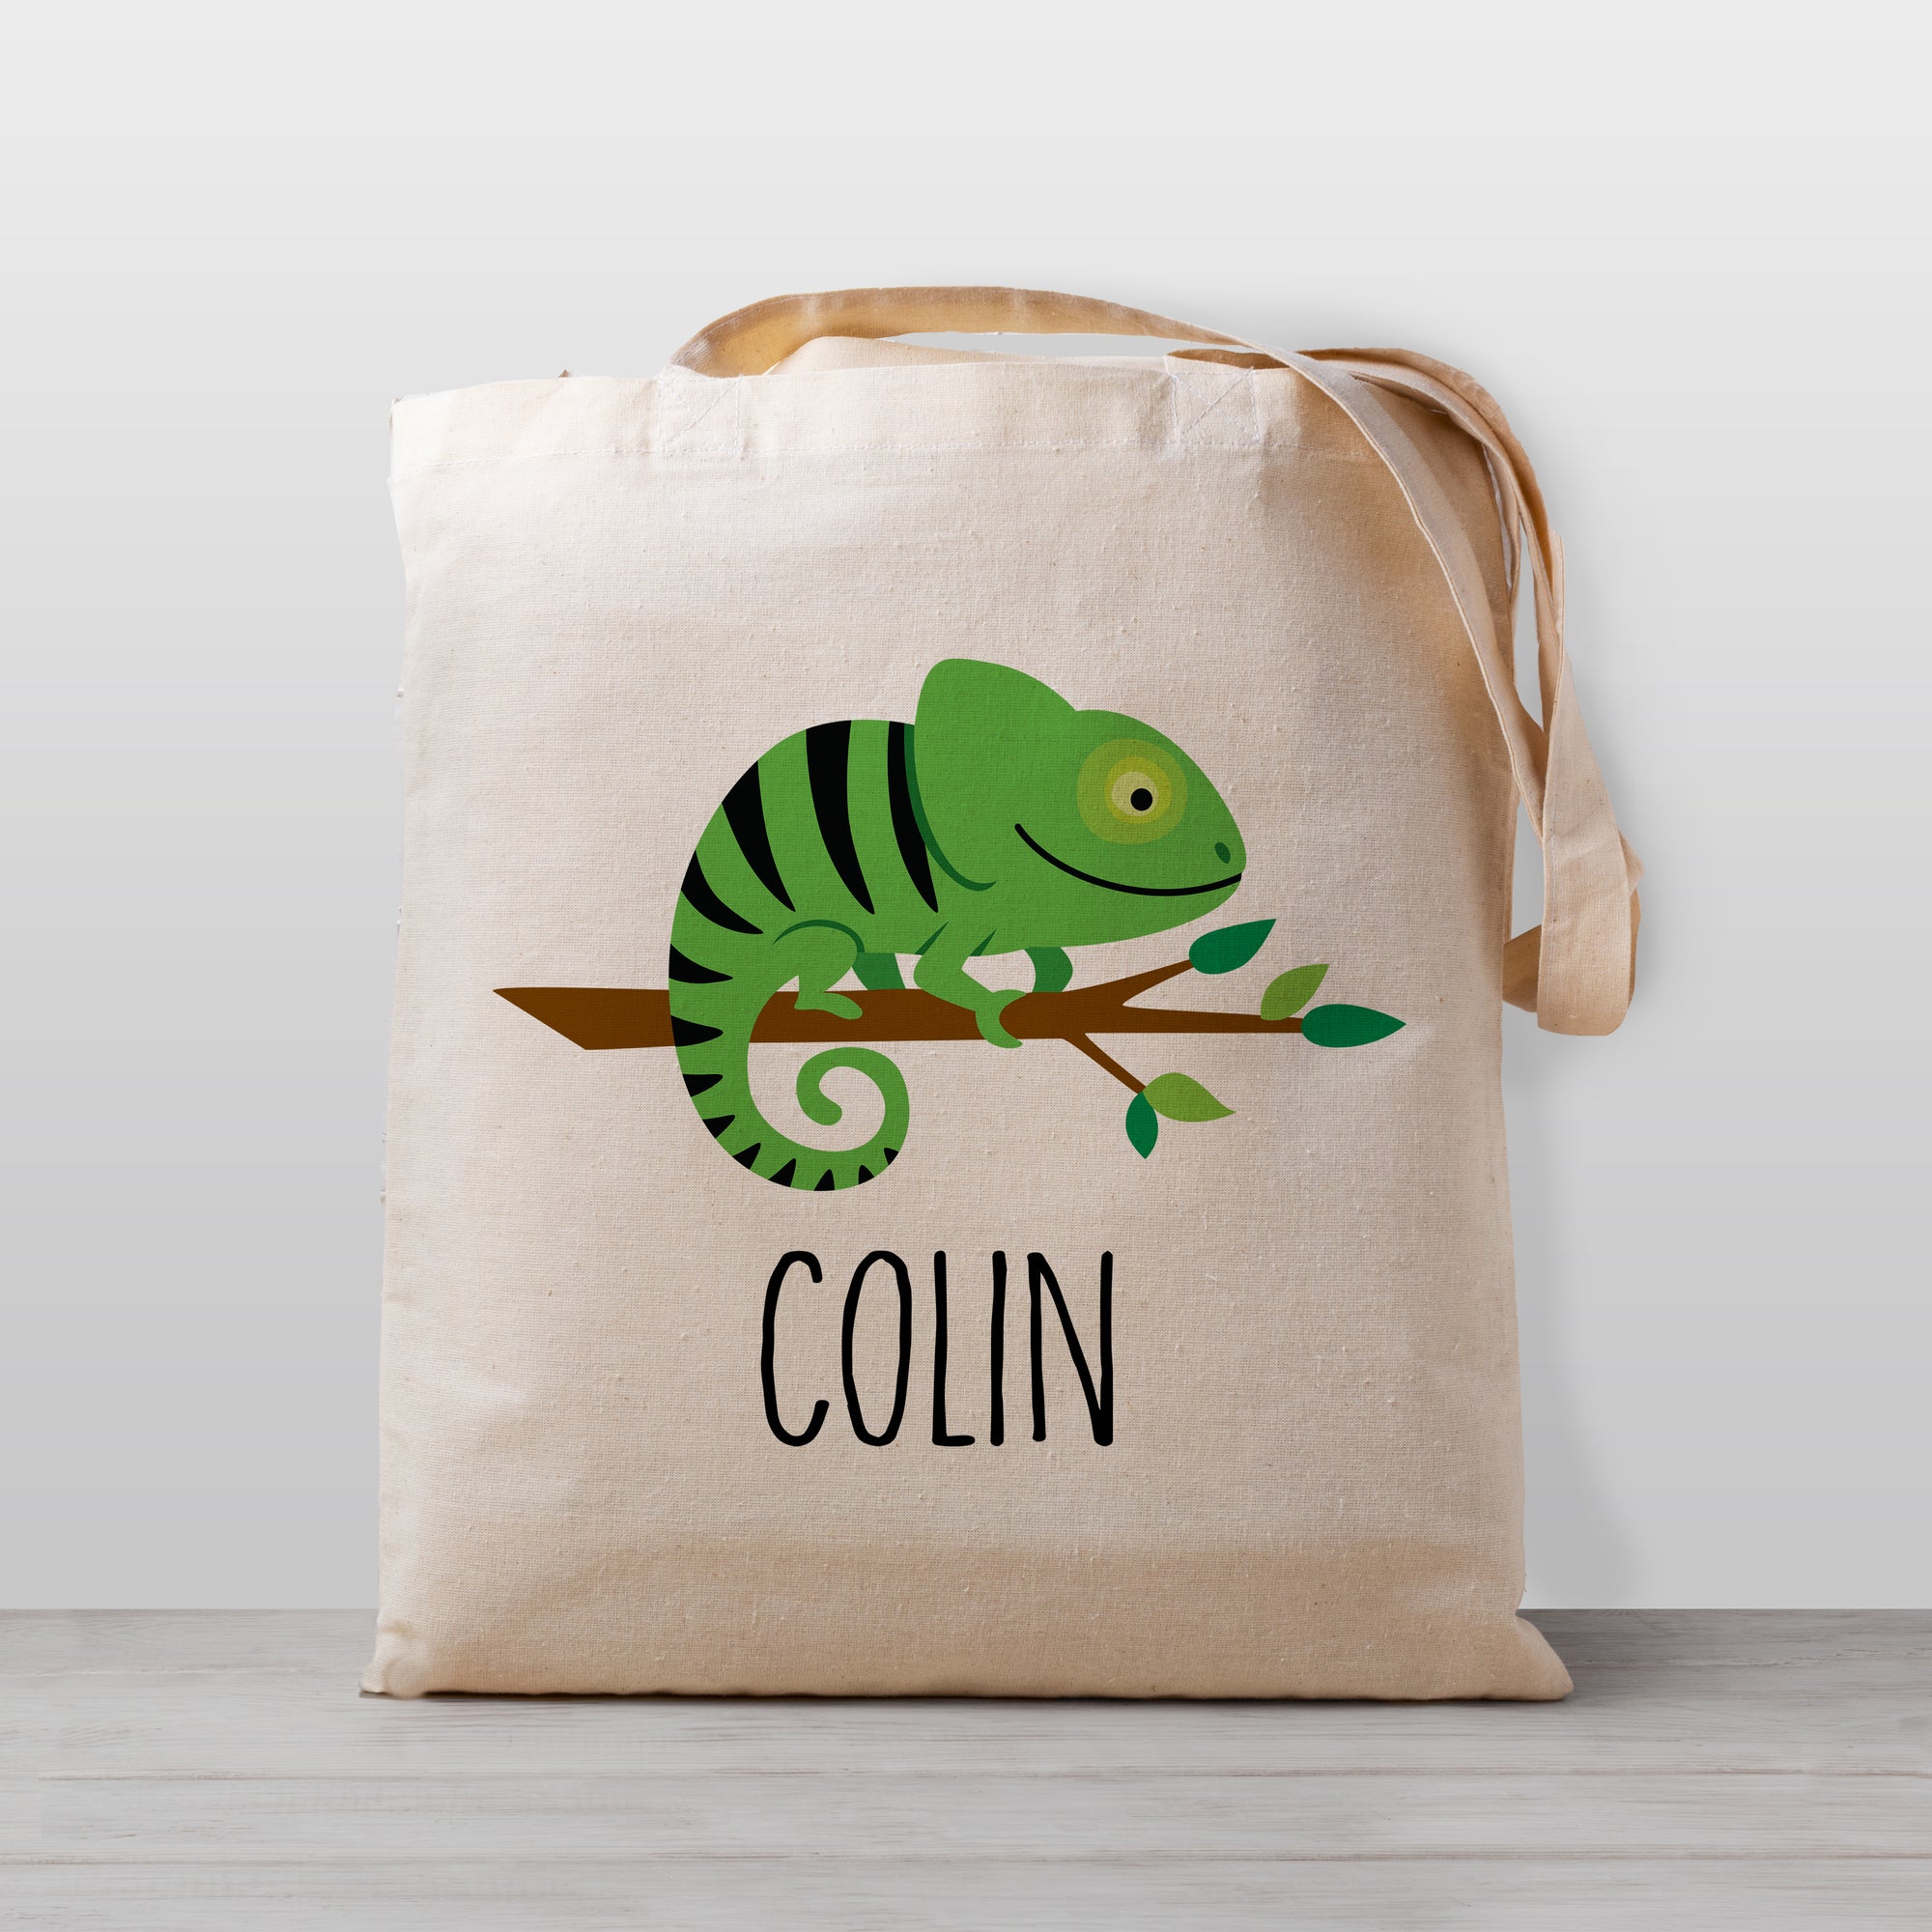 chameleon lizard personalized tote bag for boys or girls, great for daycare or preschool, 100% natural cotton canvas